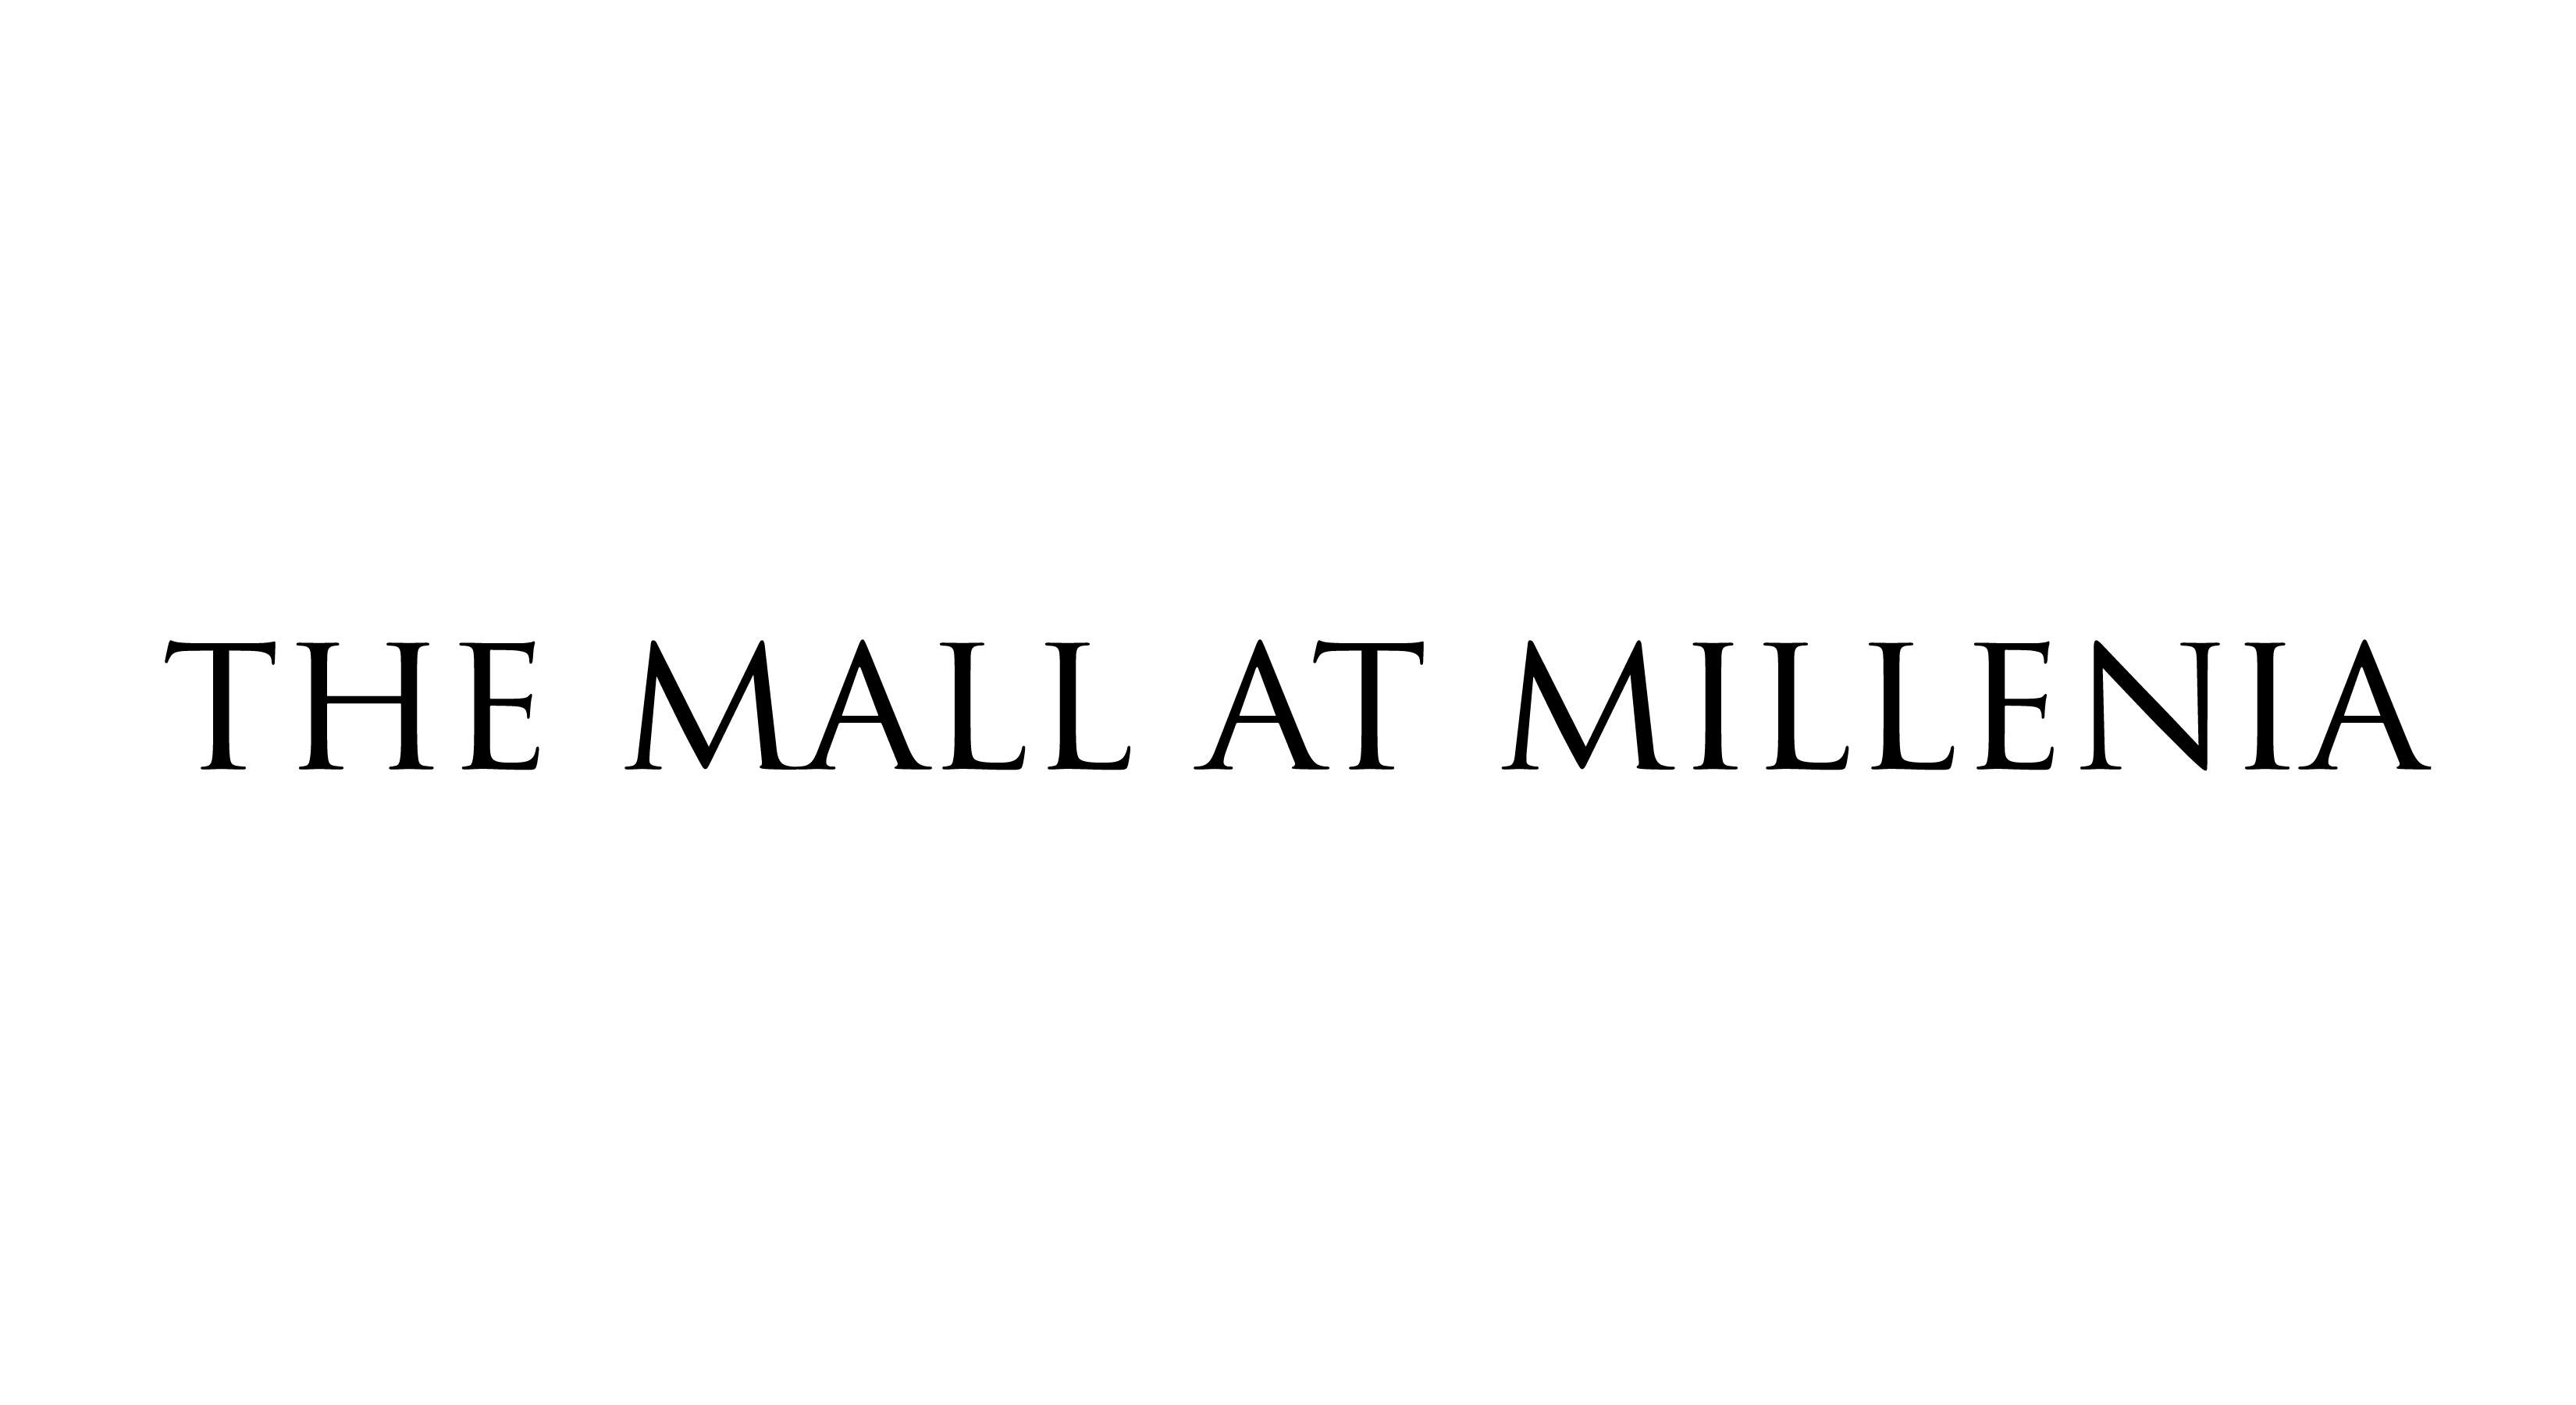 The Mall at Millenia logo in PNG format